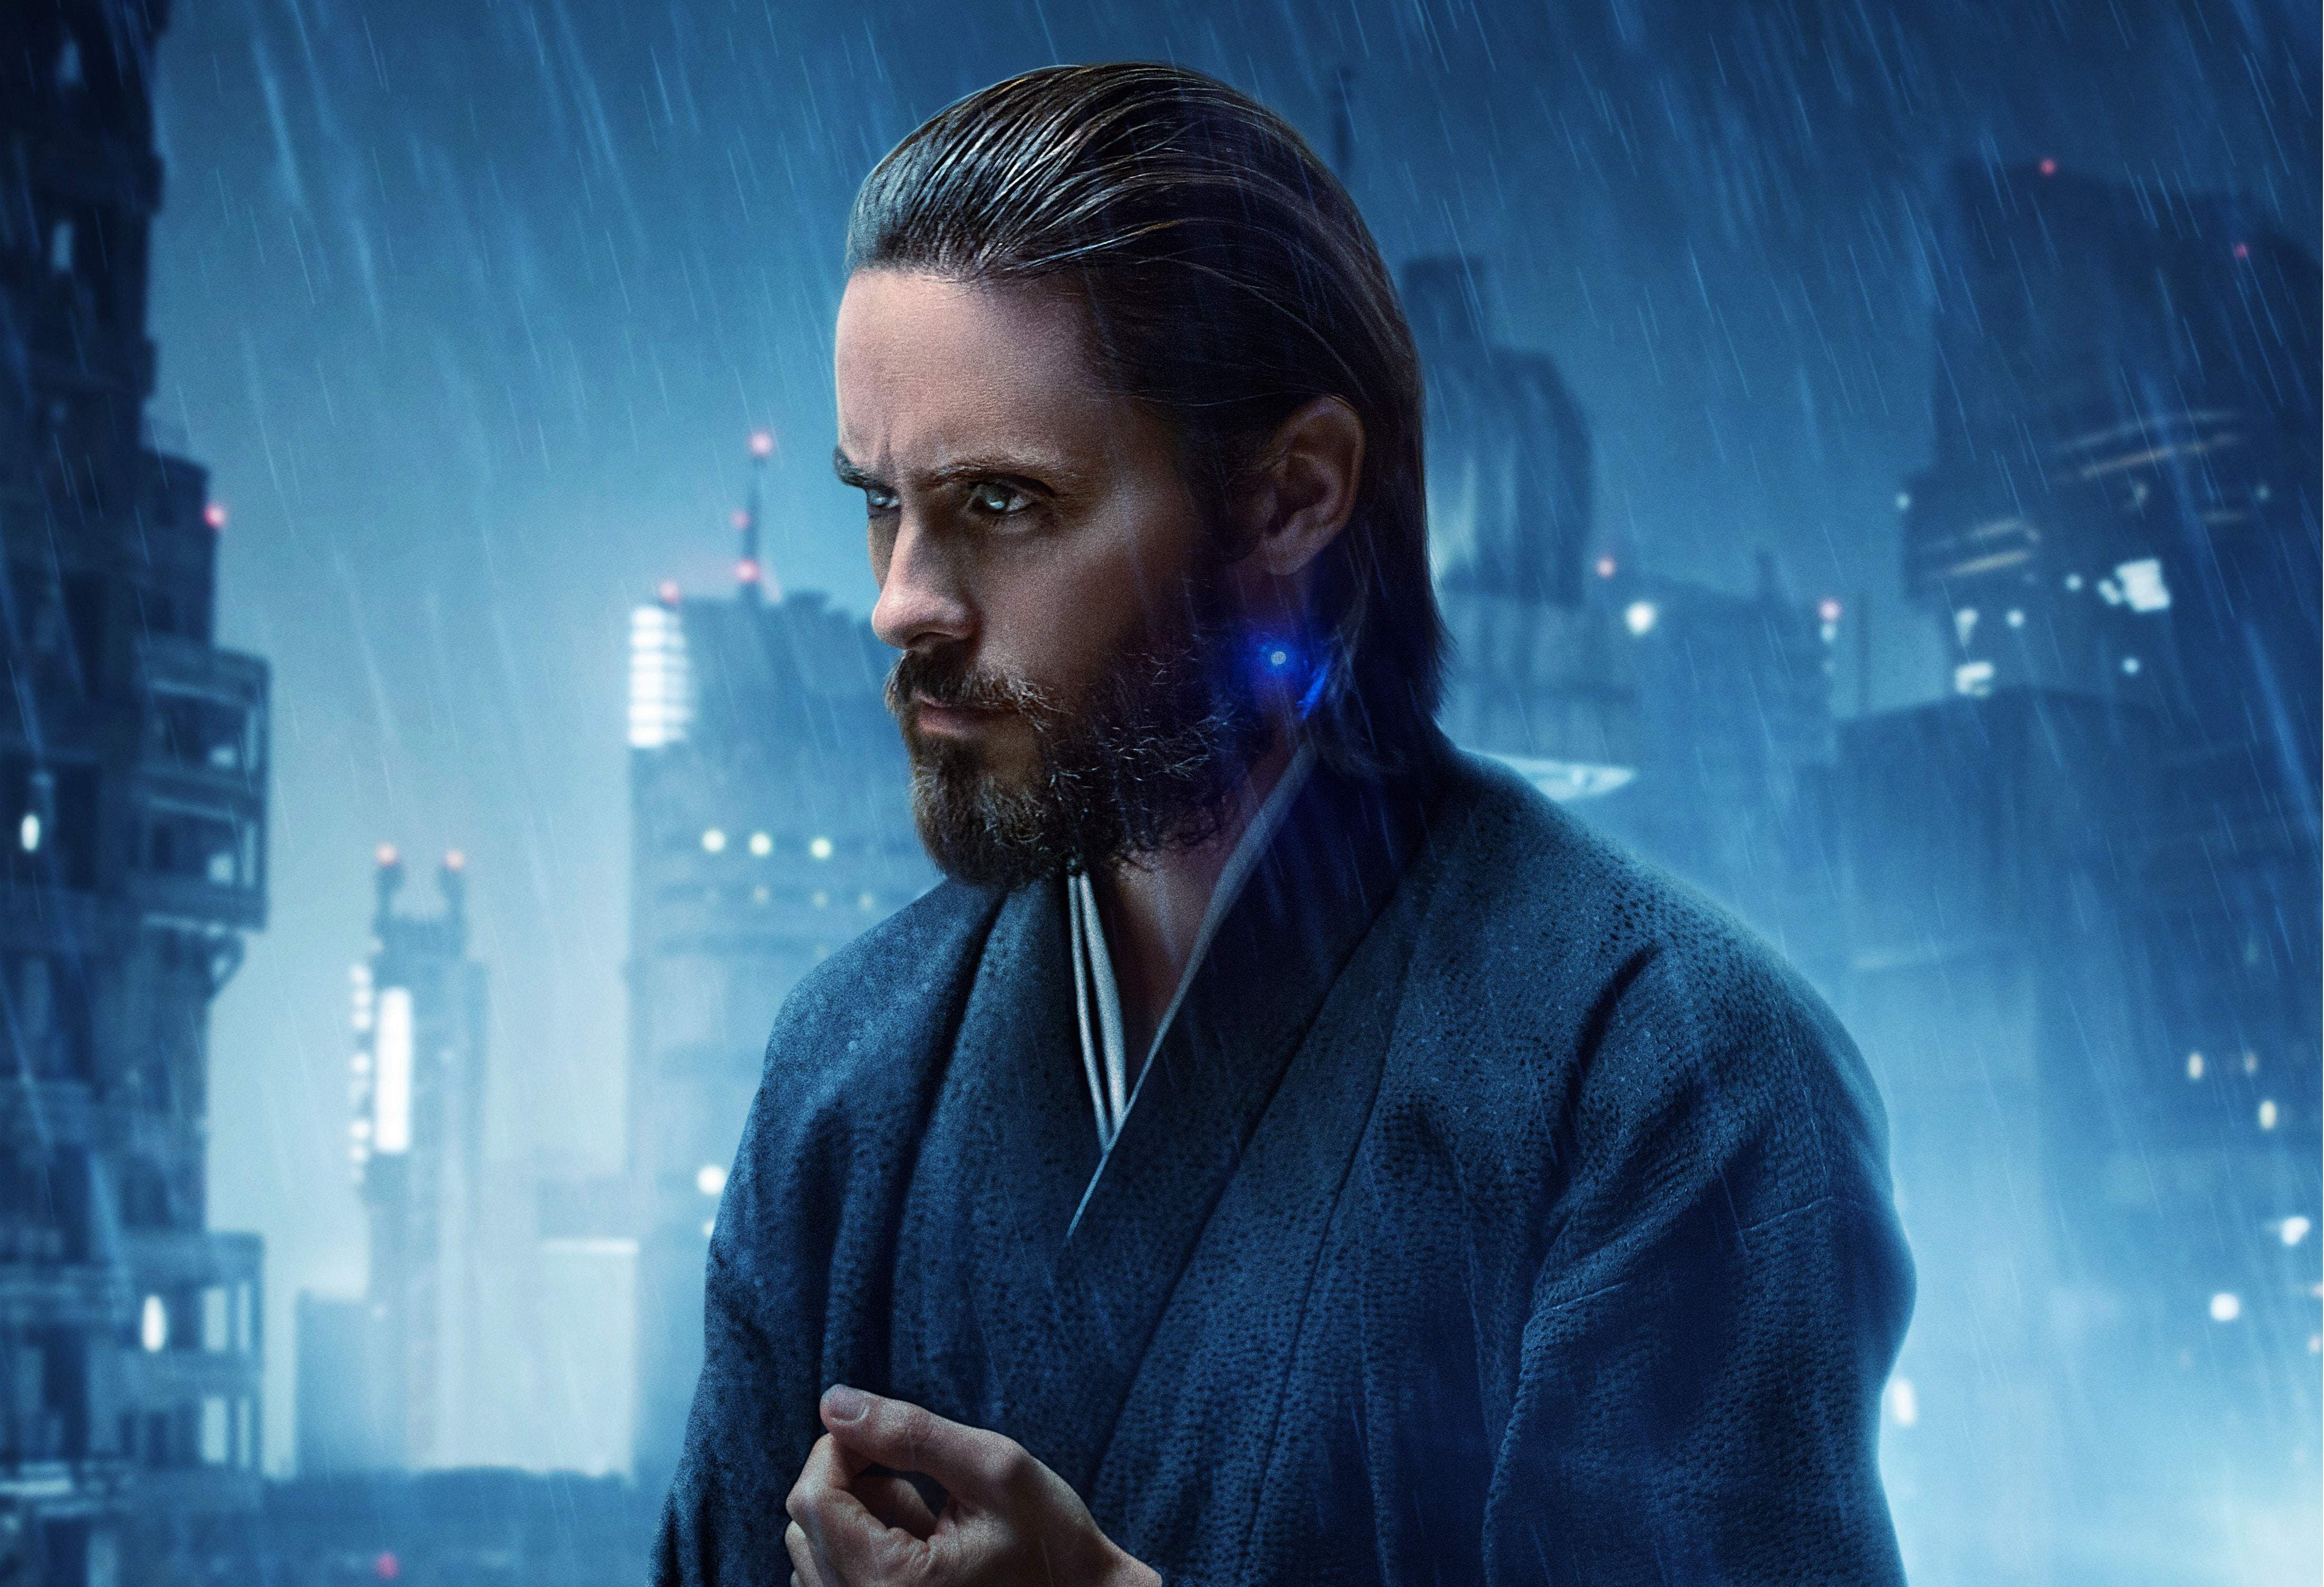 Jared Leto As Niander Wallace Blade Runner 2049, one person, beard